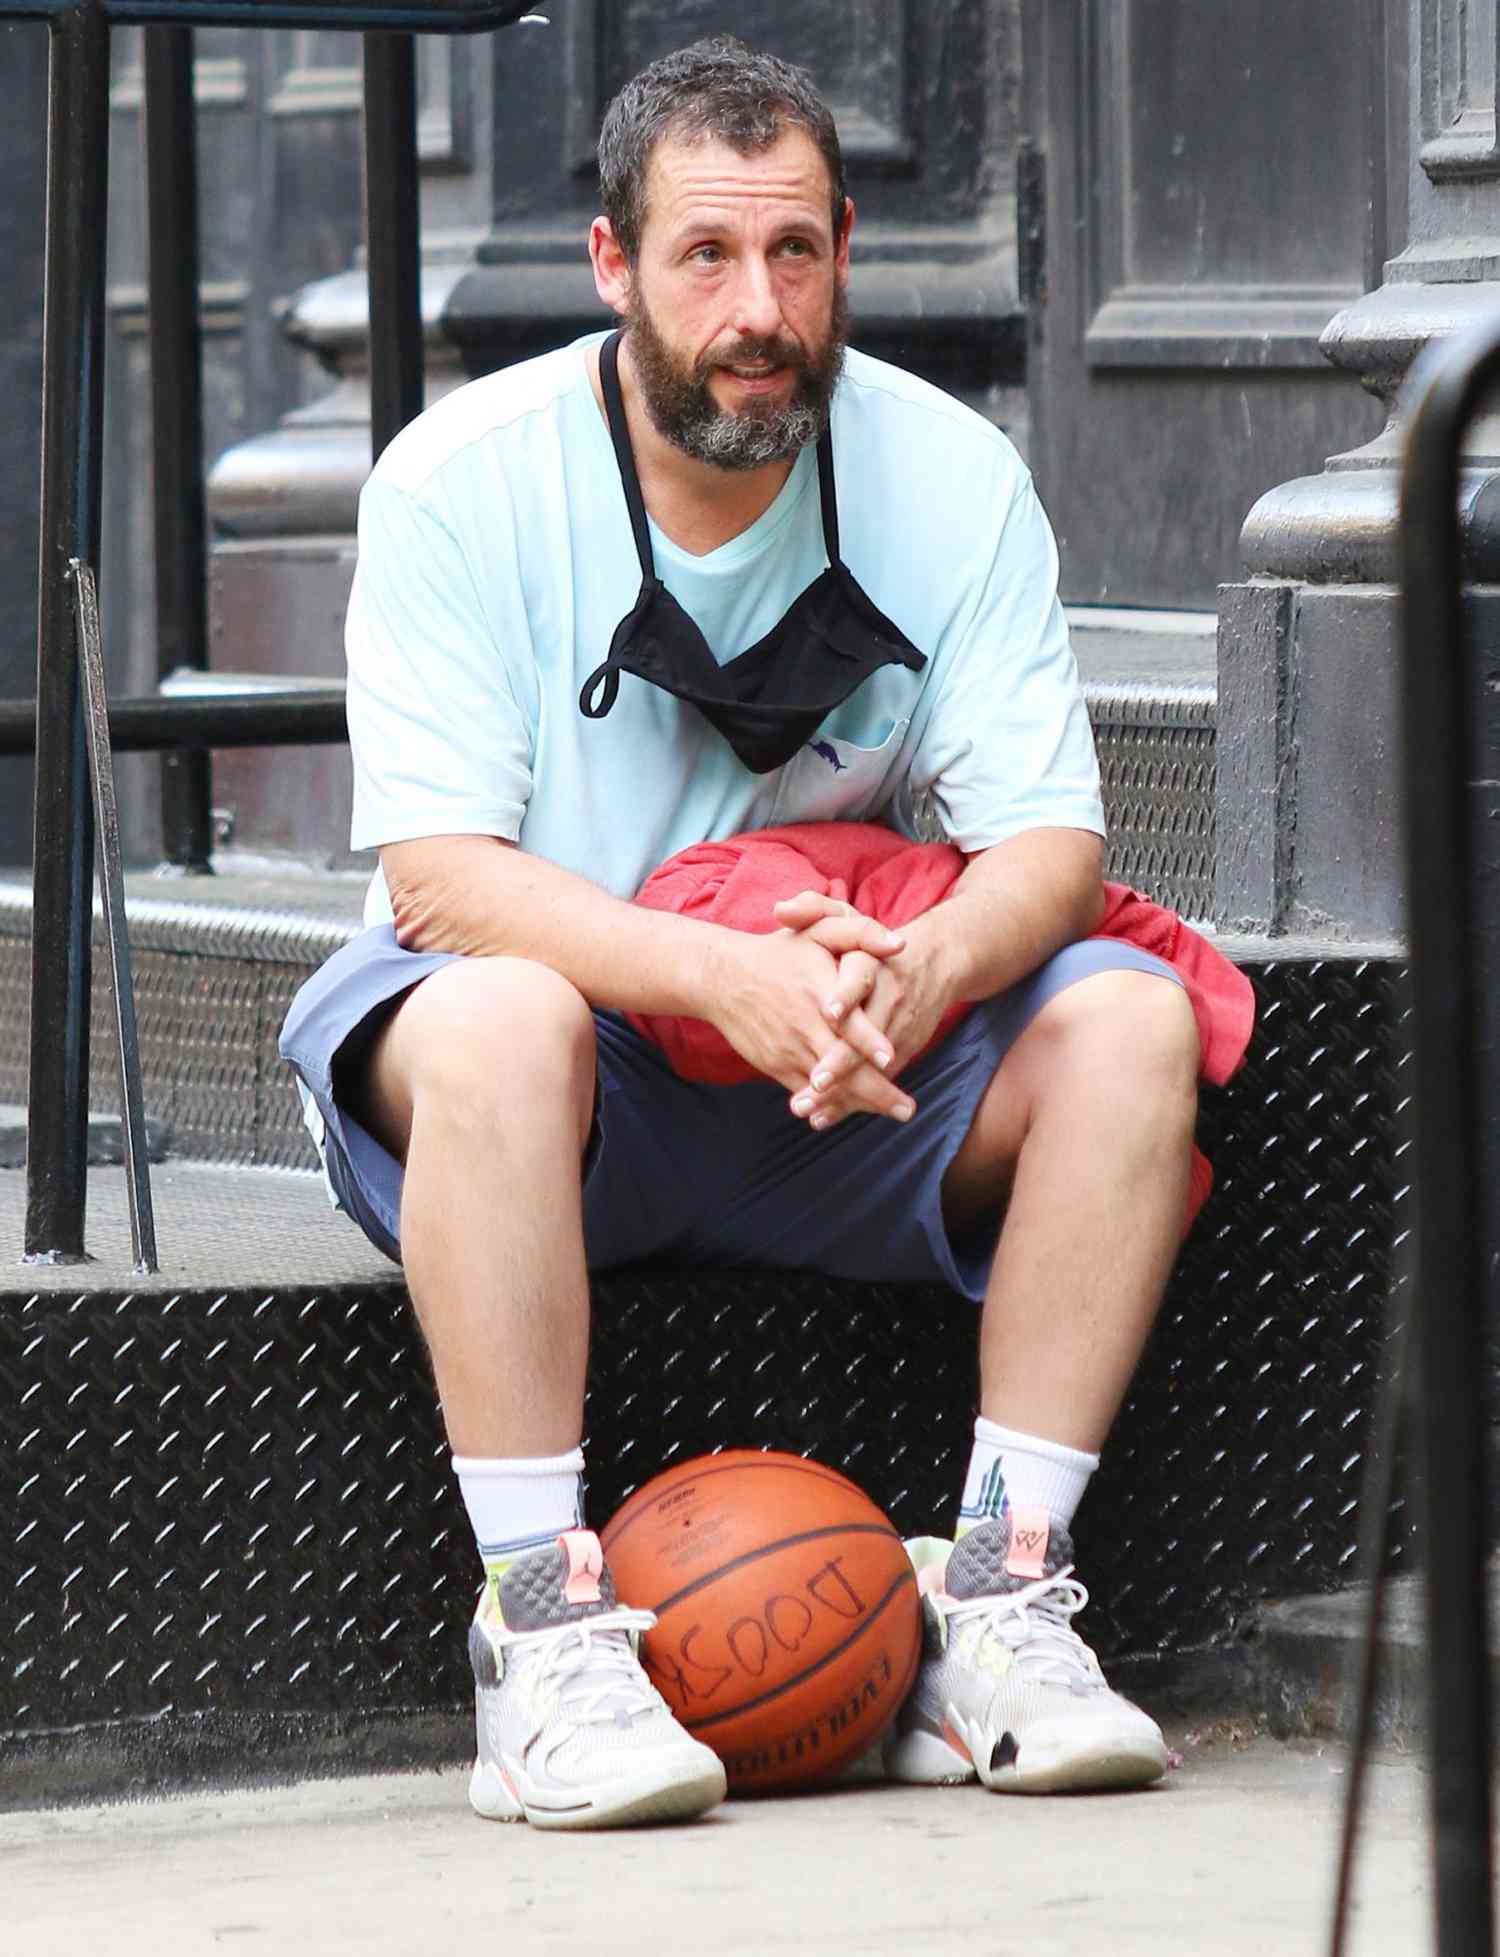 Adam Sandler holds a basketball and sits down to rest after a game in NYC